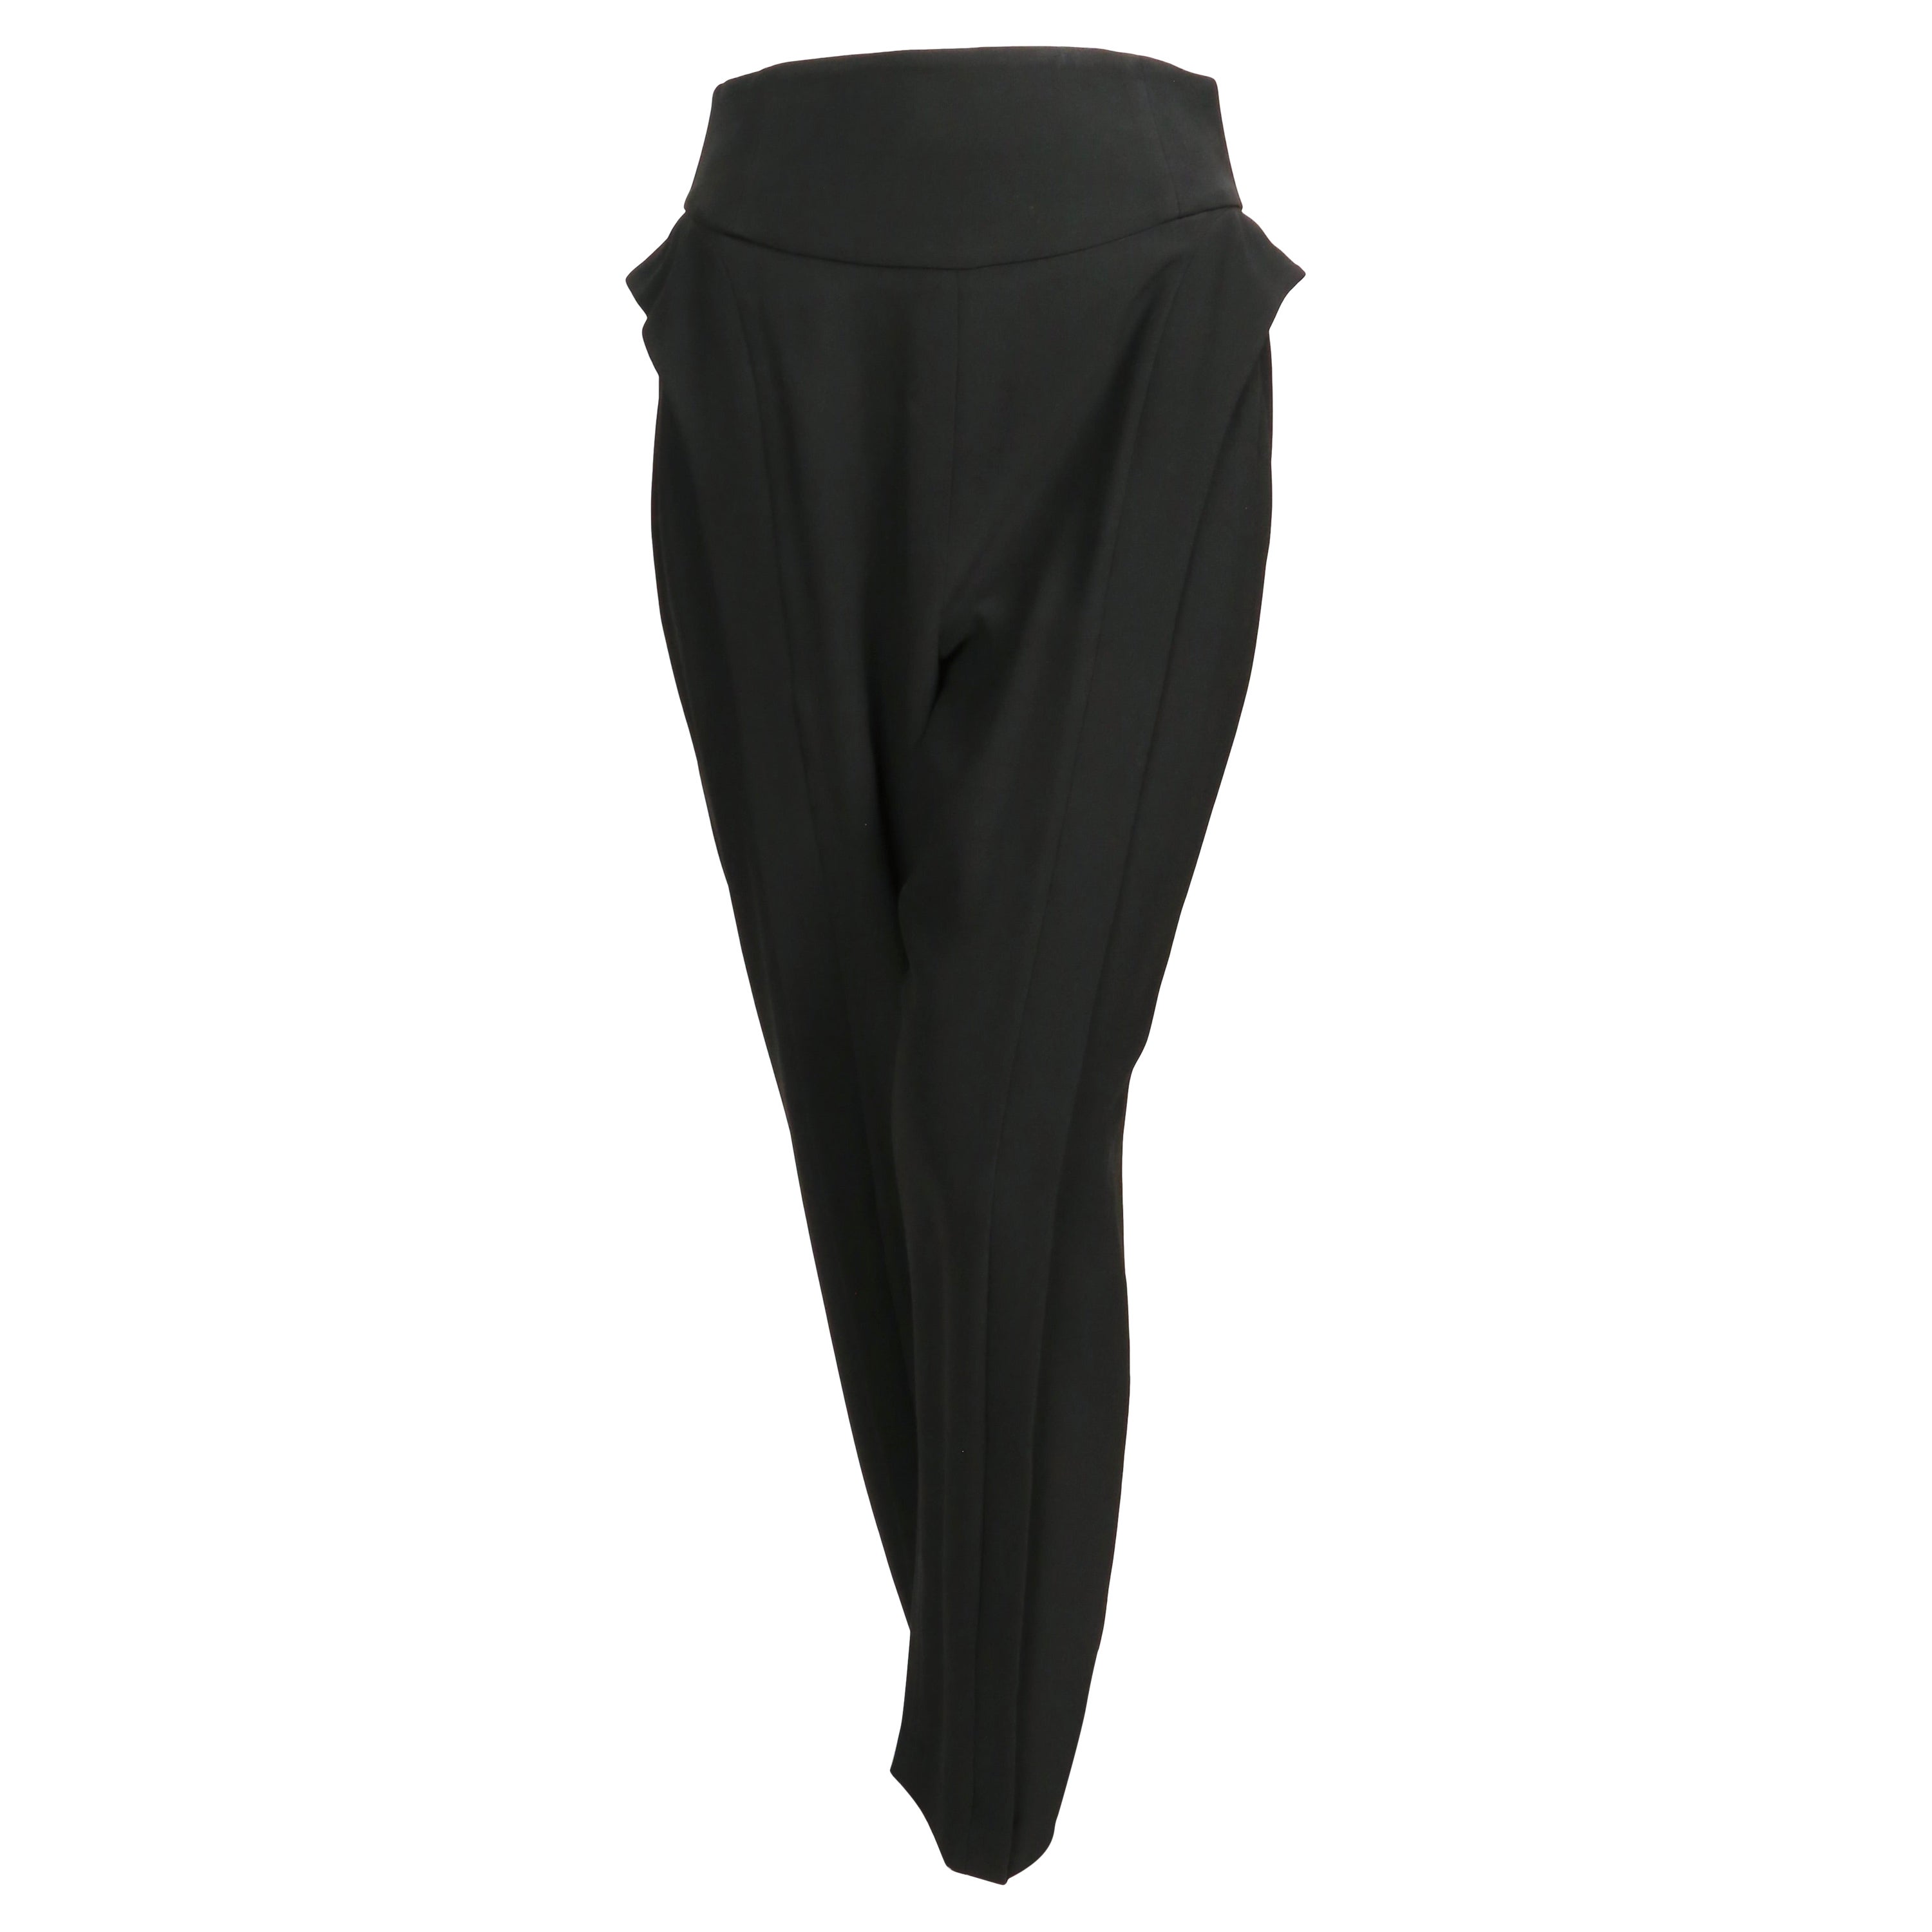 2000's ALEXANDER MCQUEEN black pants with side ruffles For Sale